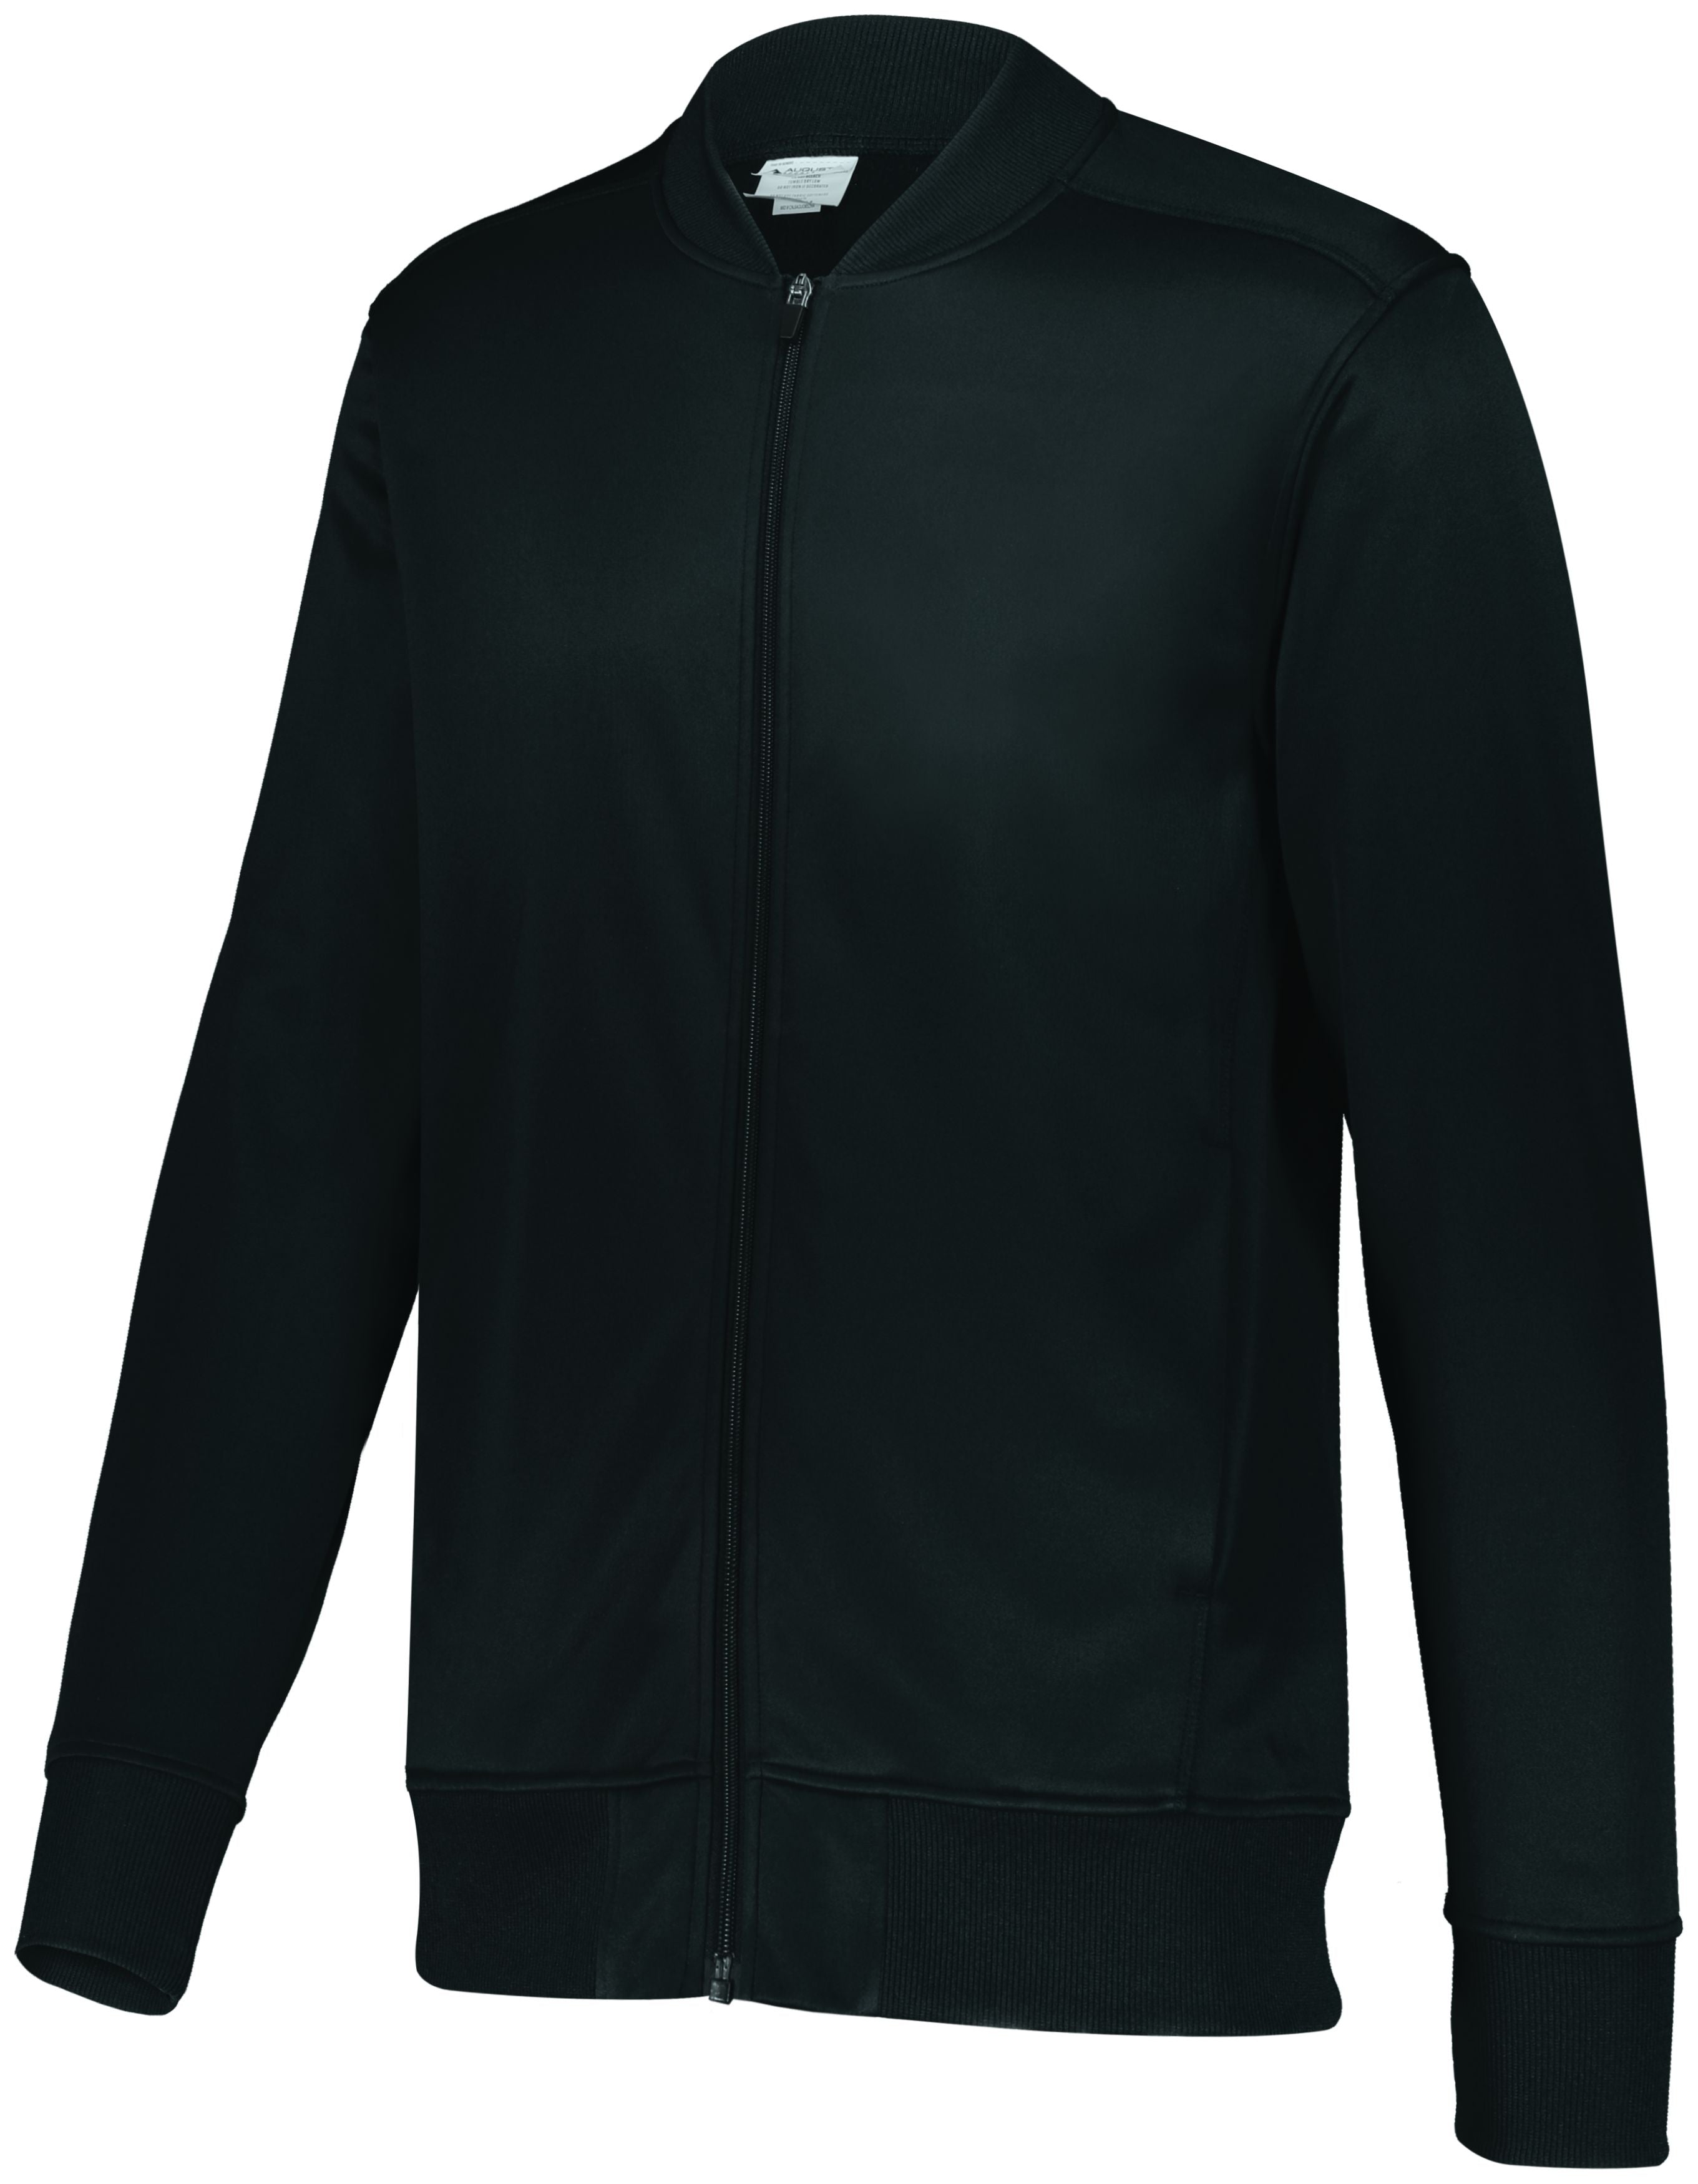 Augusta Sportswear Trainer Jacket in Black  -Part of the Adult, Adult-Jacket, Augusta-Products, Outerwear product lines at KanaleyCreations.com